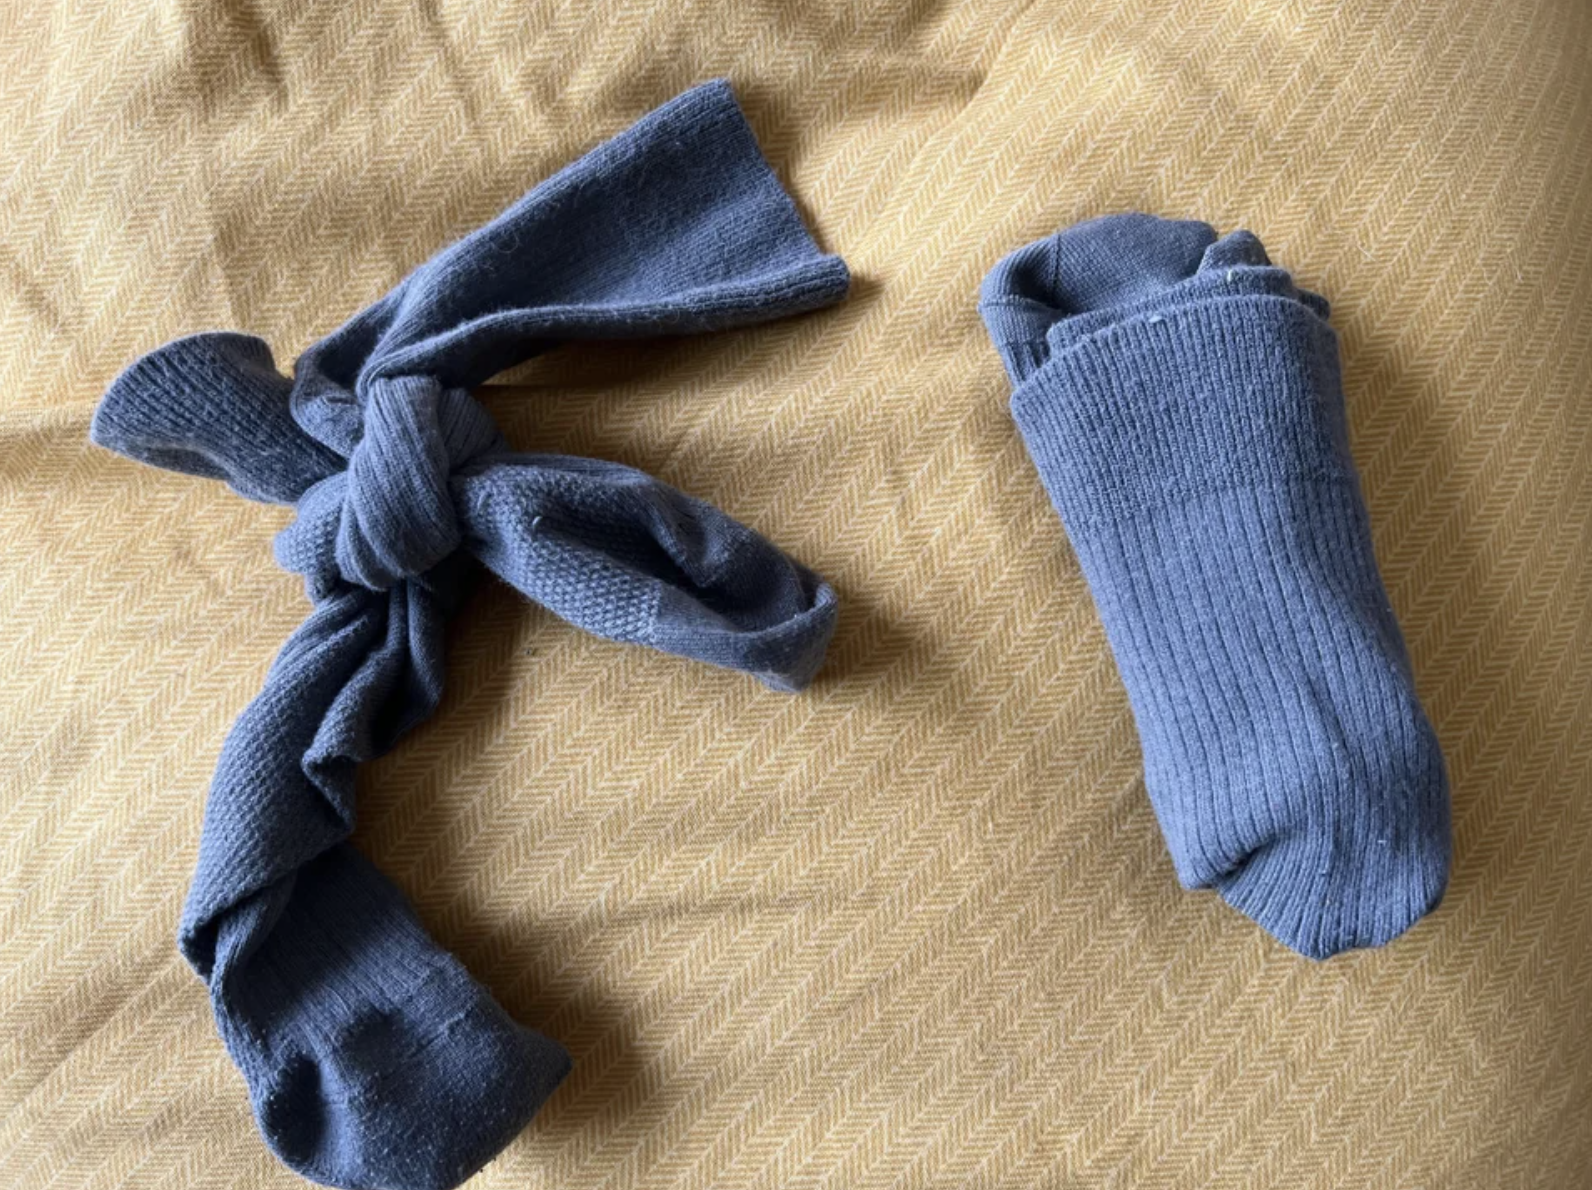 The pair of socks is tied in a bow